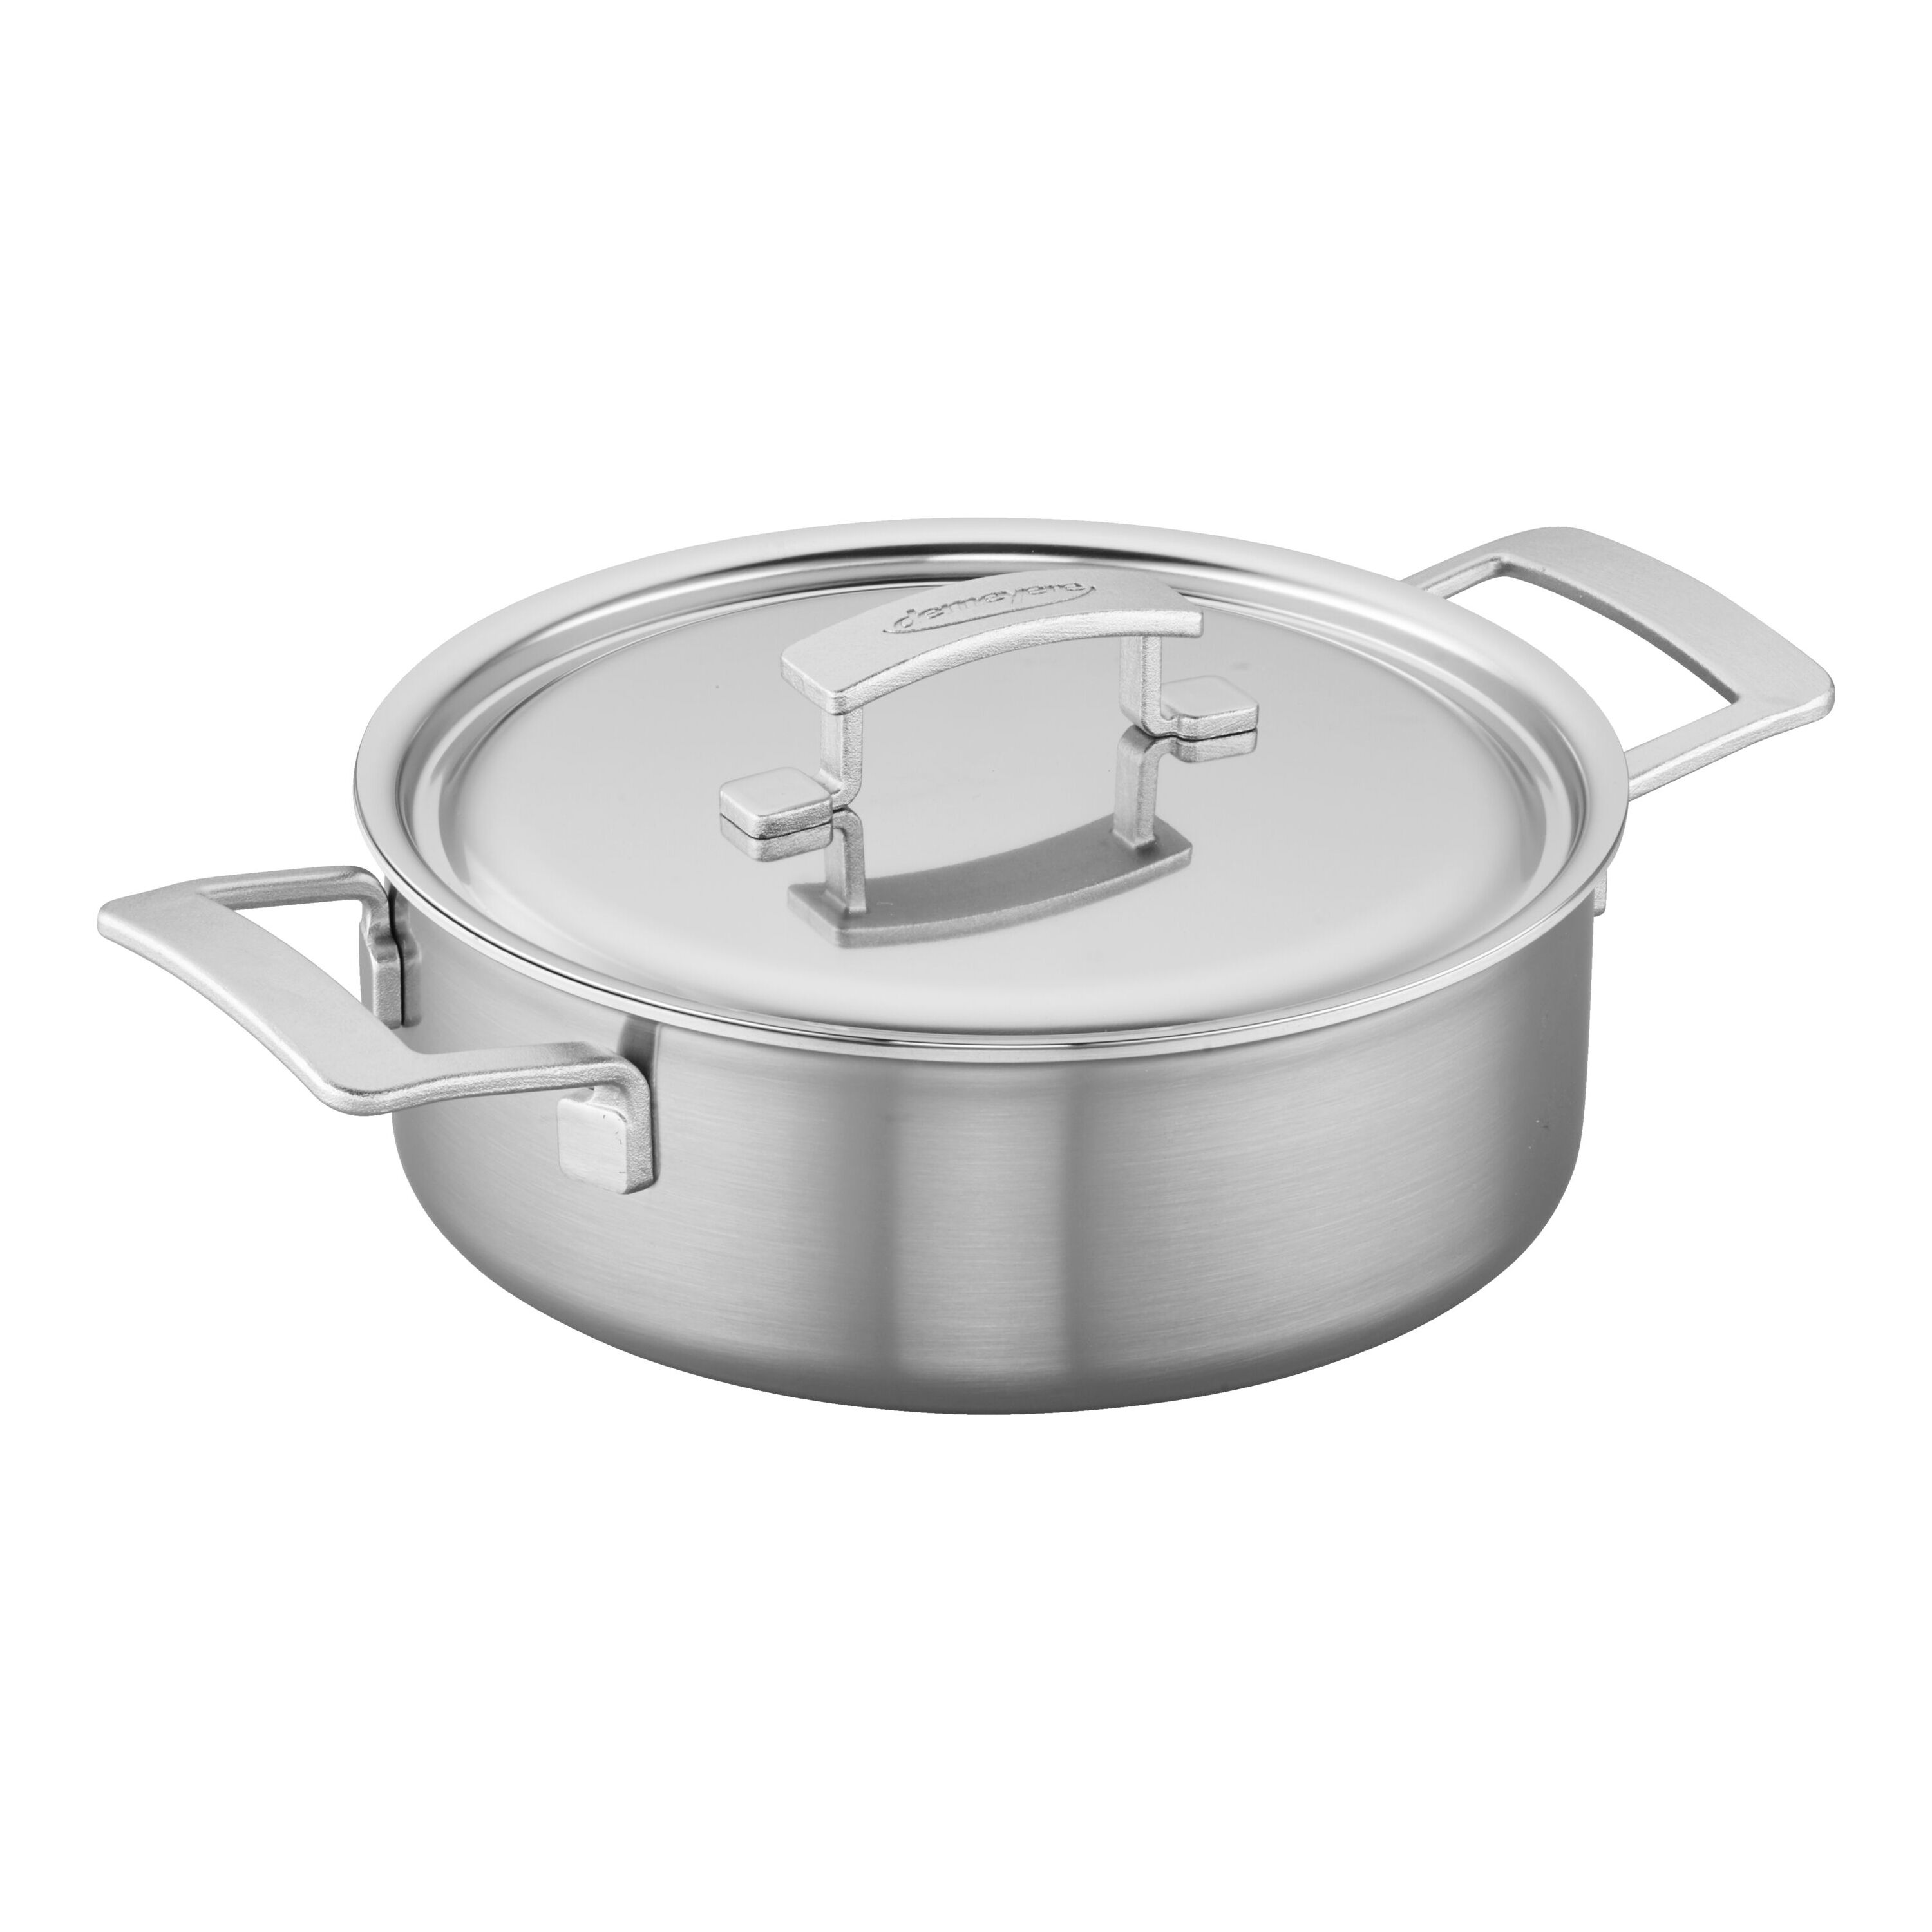 Belgique Stainless Steel 5-Qt. Sauté Pan with Lid, Created for